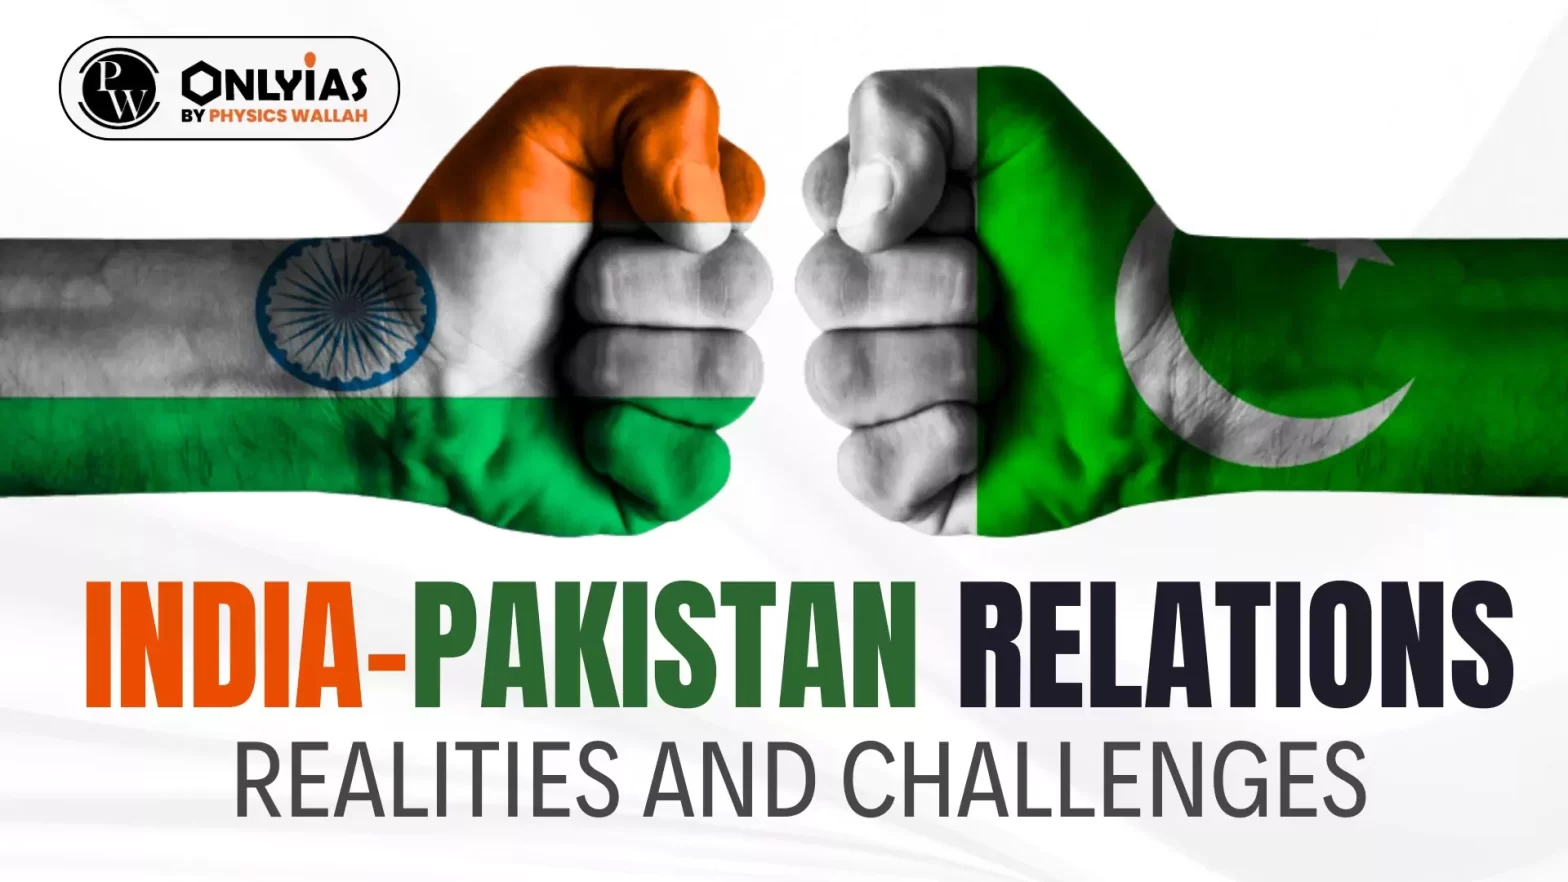 India Pakistan Relations: Realities and Challenges